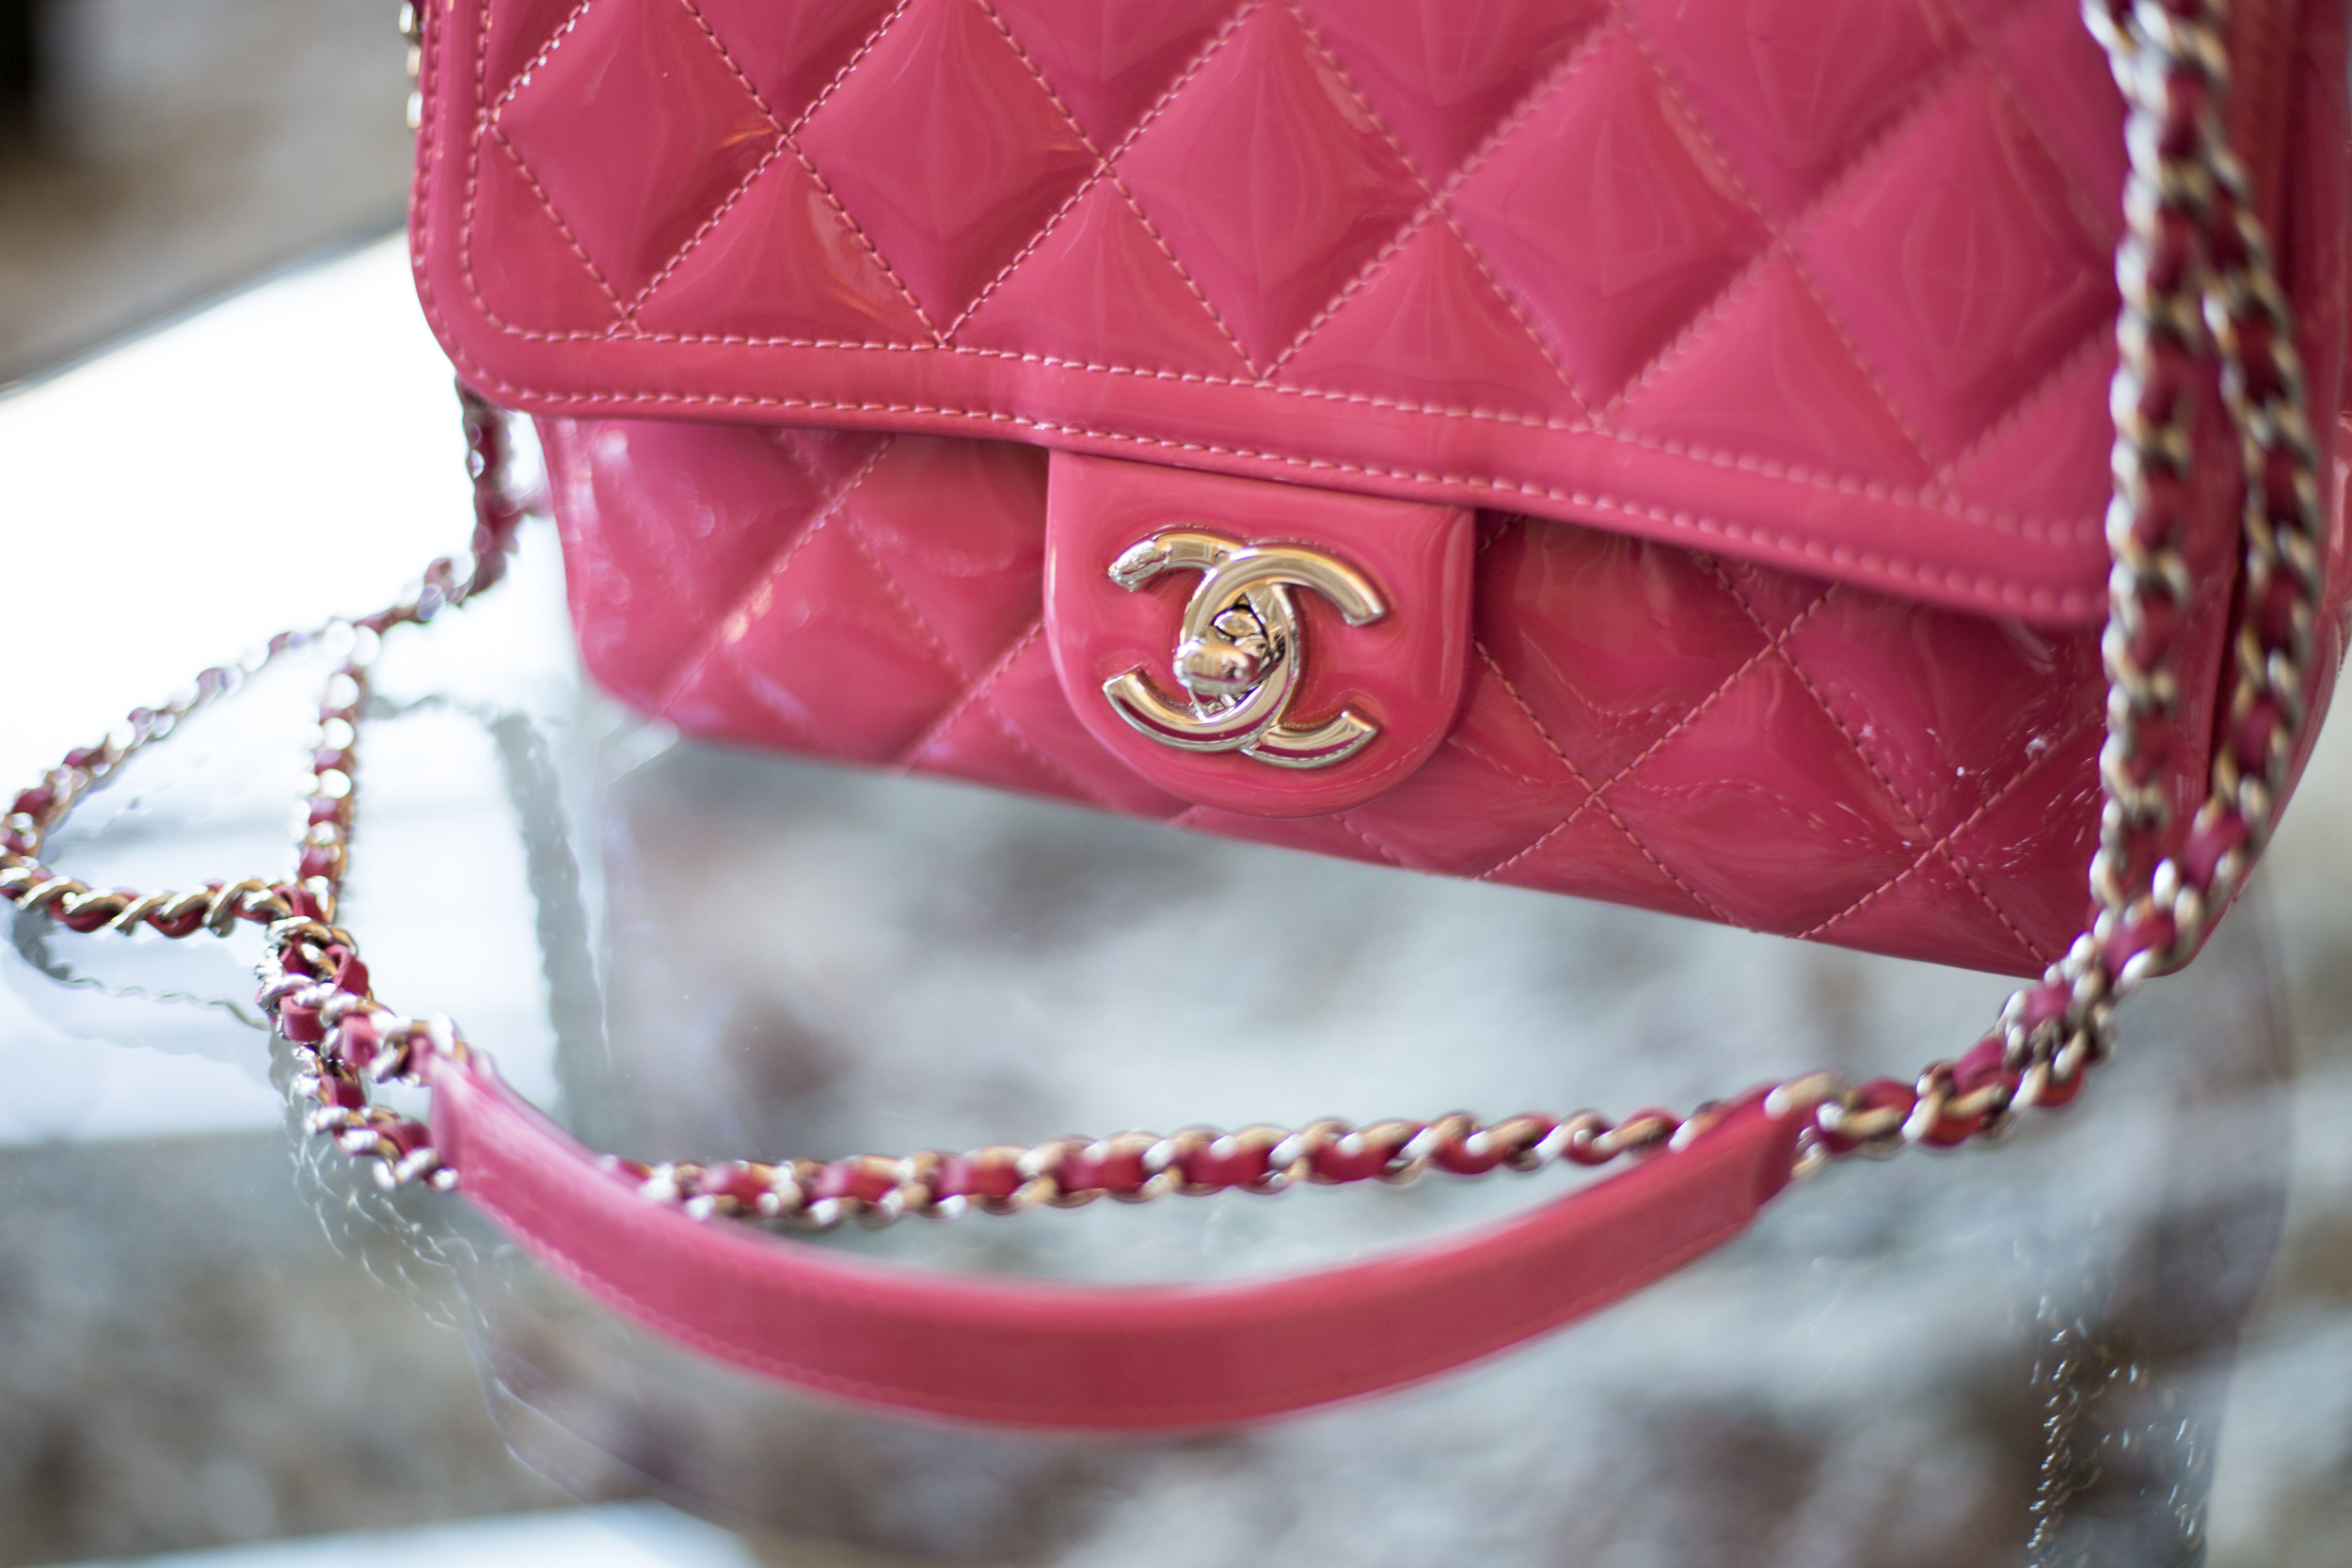 Chanel Pink Mini Square Patent Leather Classic Flap Bag